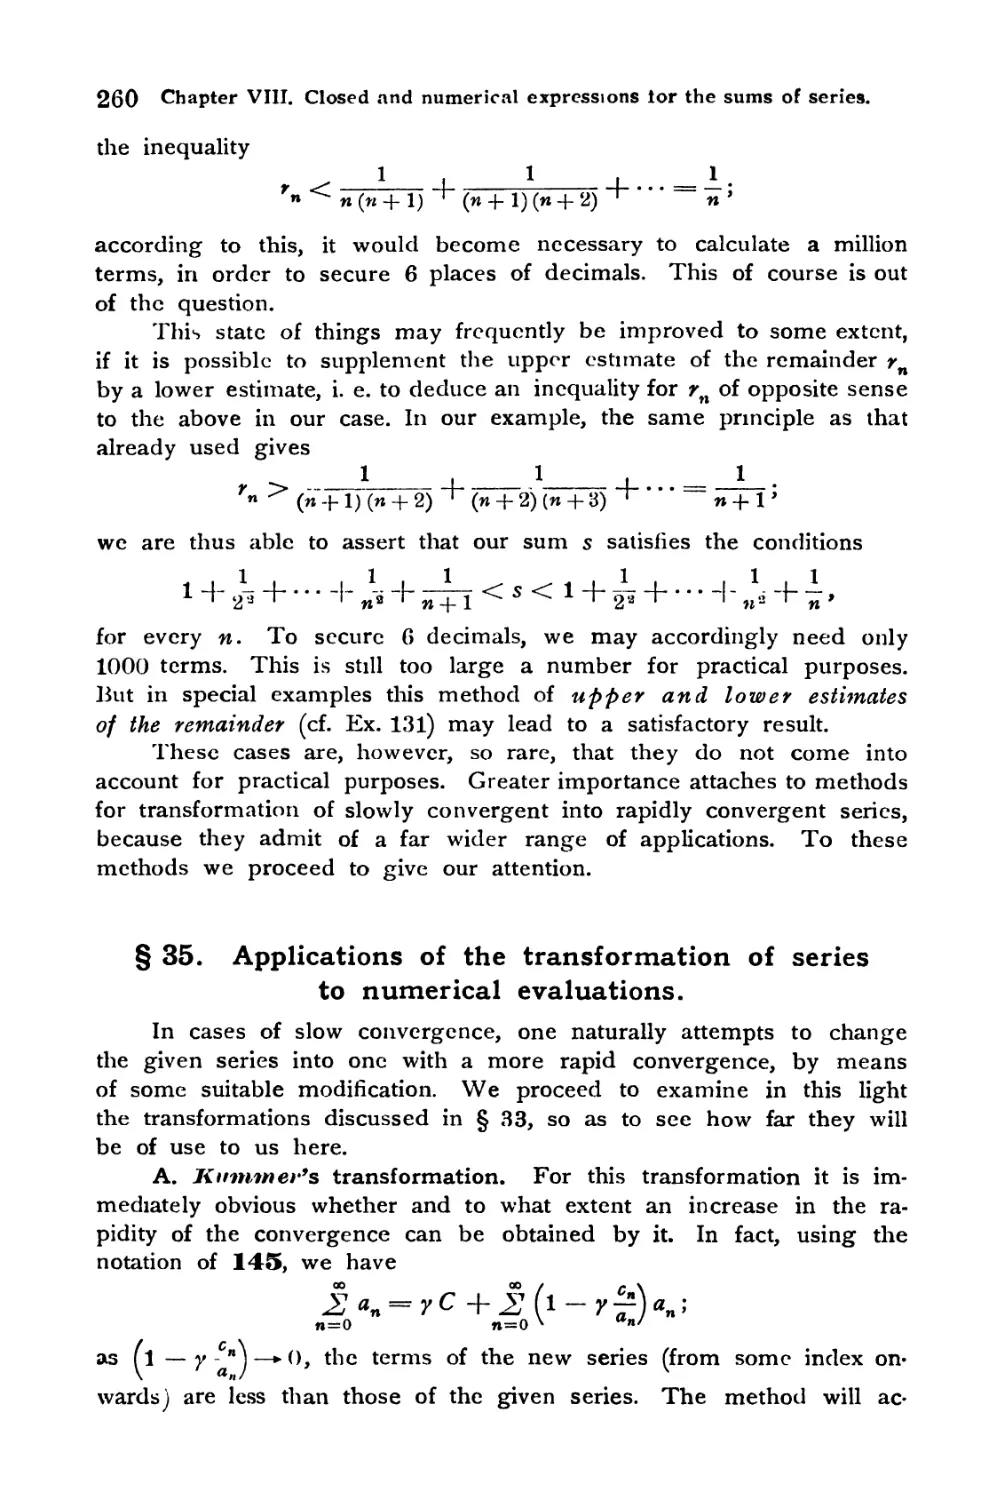 § 35. Applications of the transformation of series to numerical evaluations